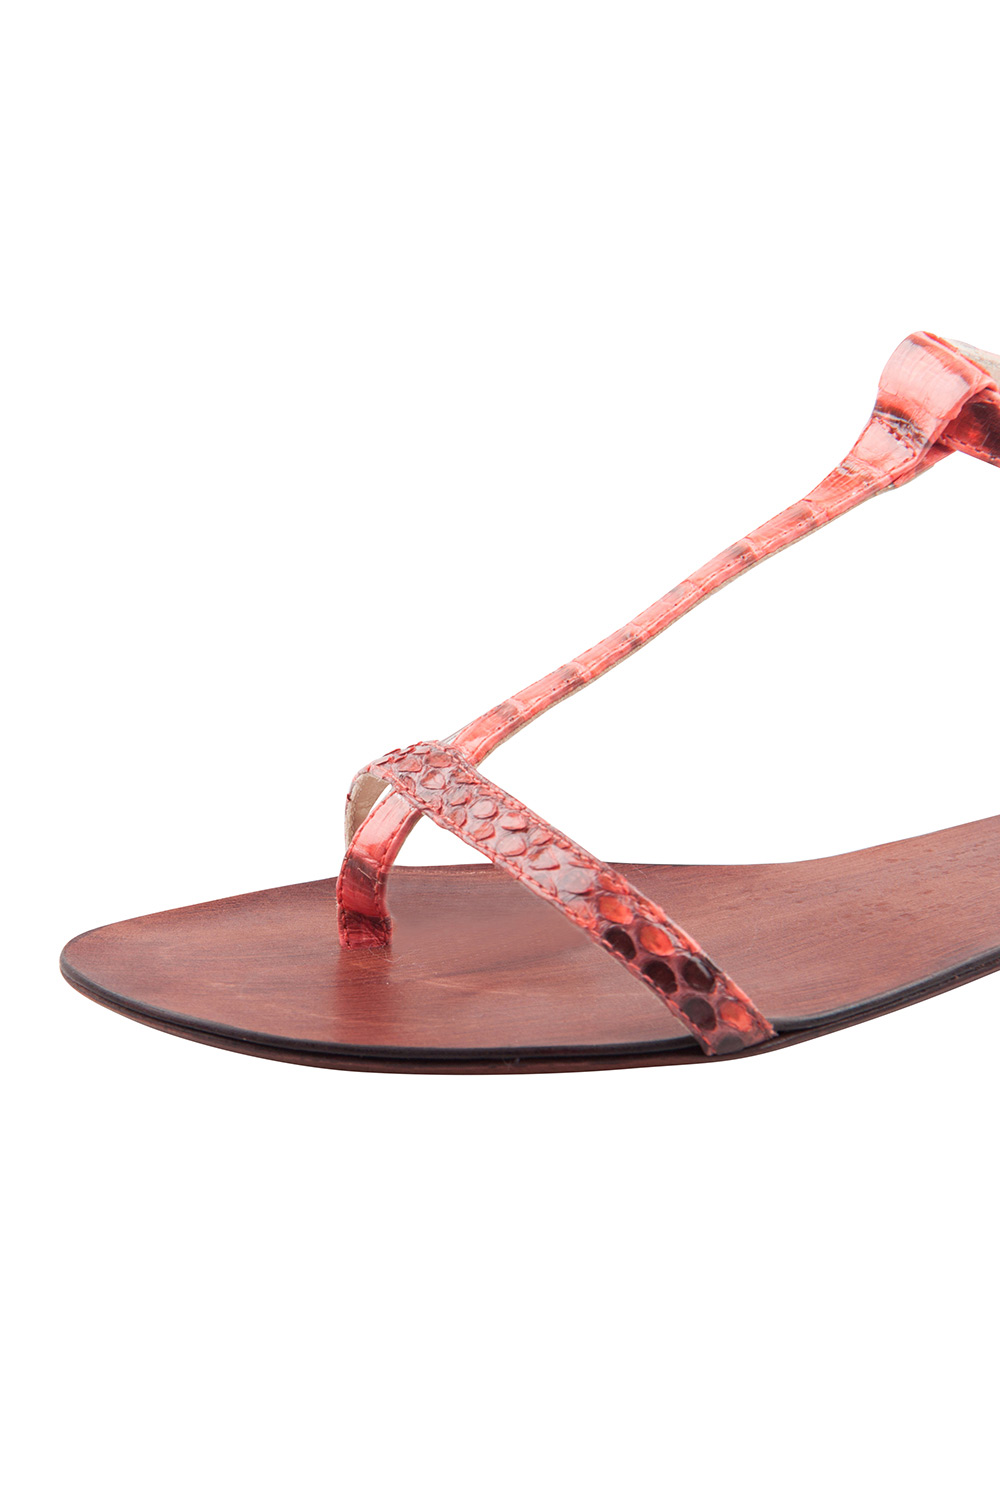 Pre-owned Alexandre Birman Red Python Leather T Strap Flat Sandals Size 38.5